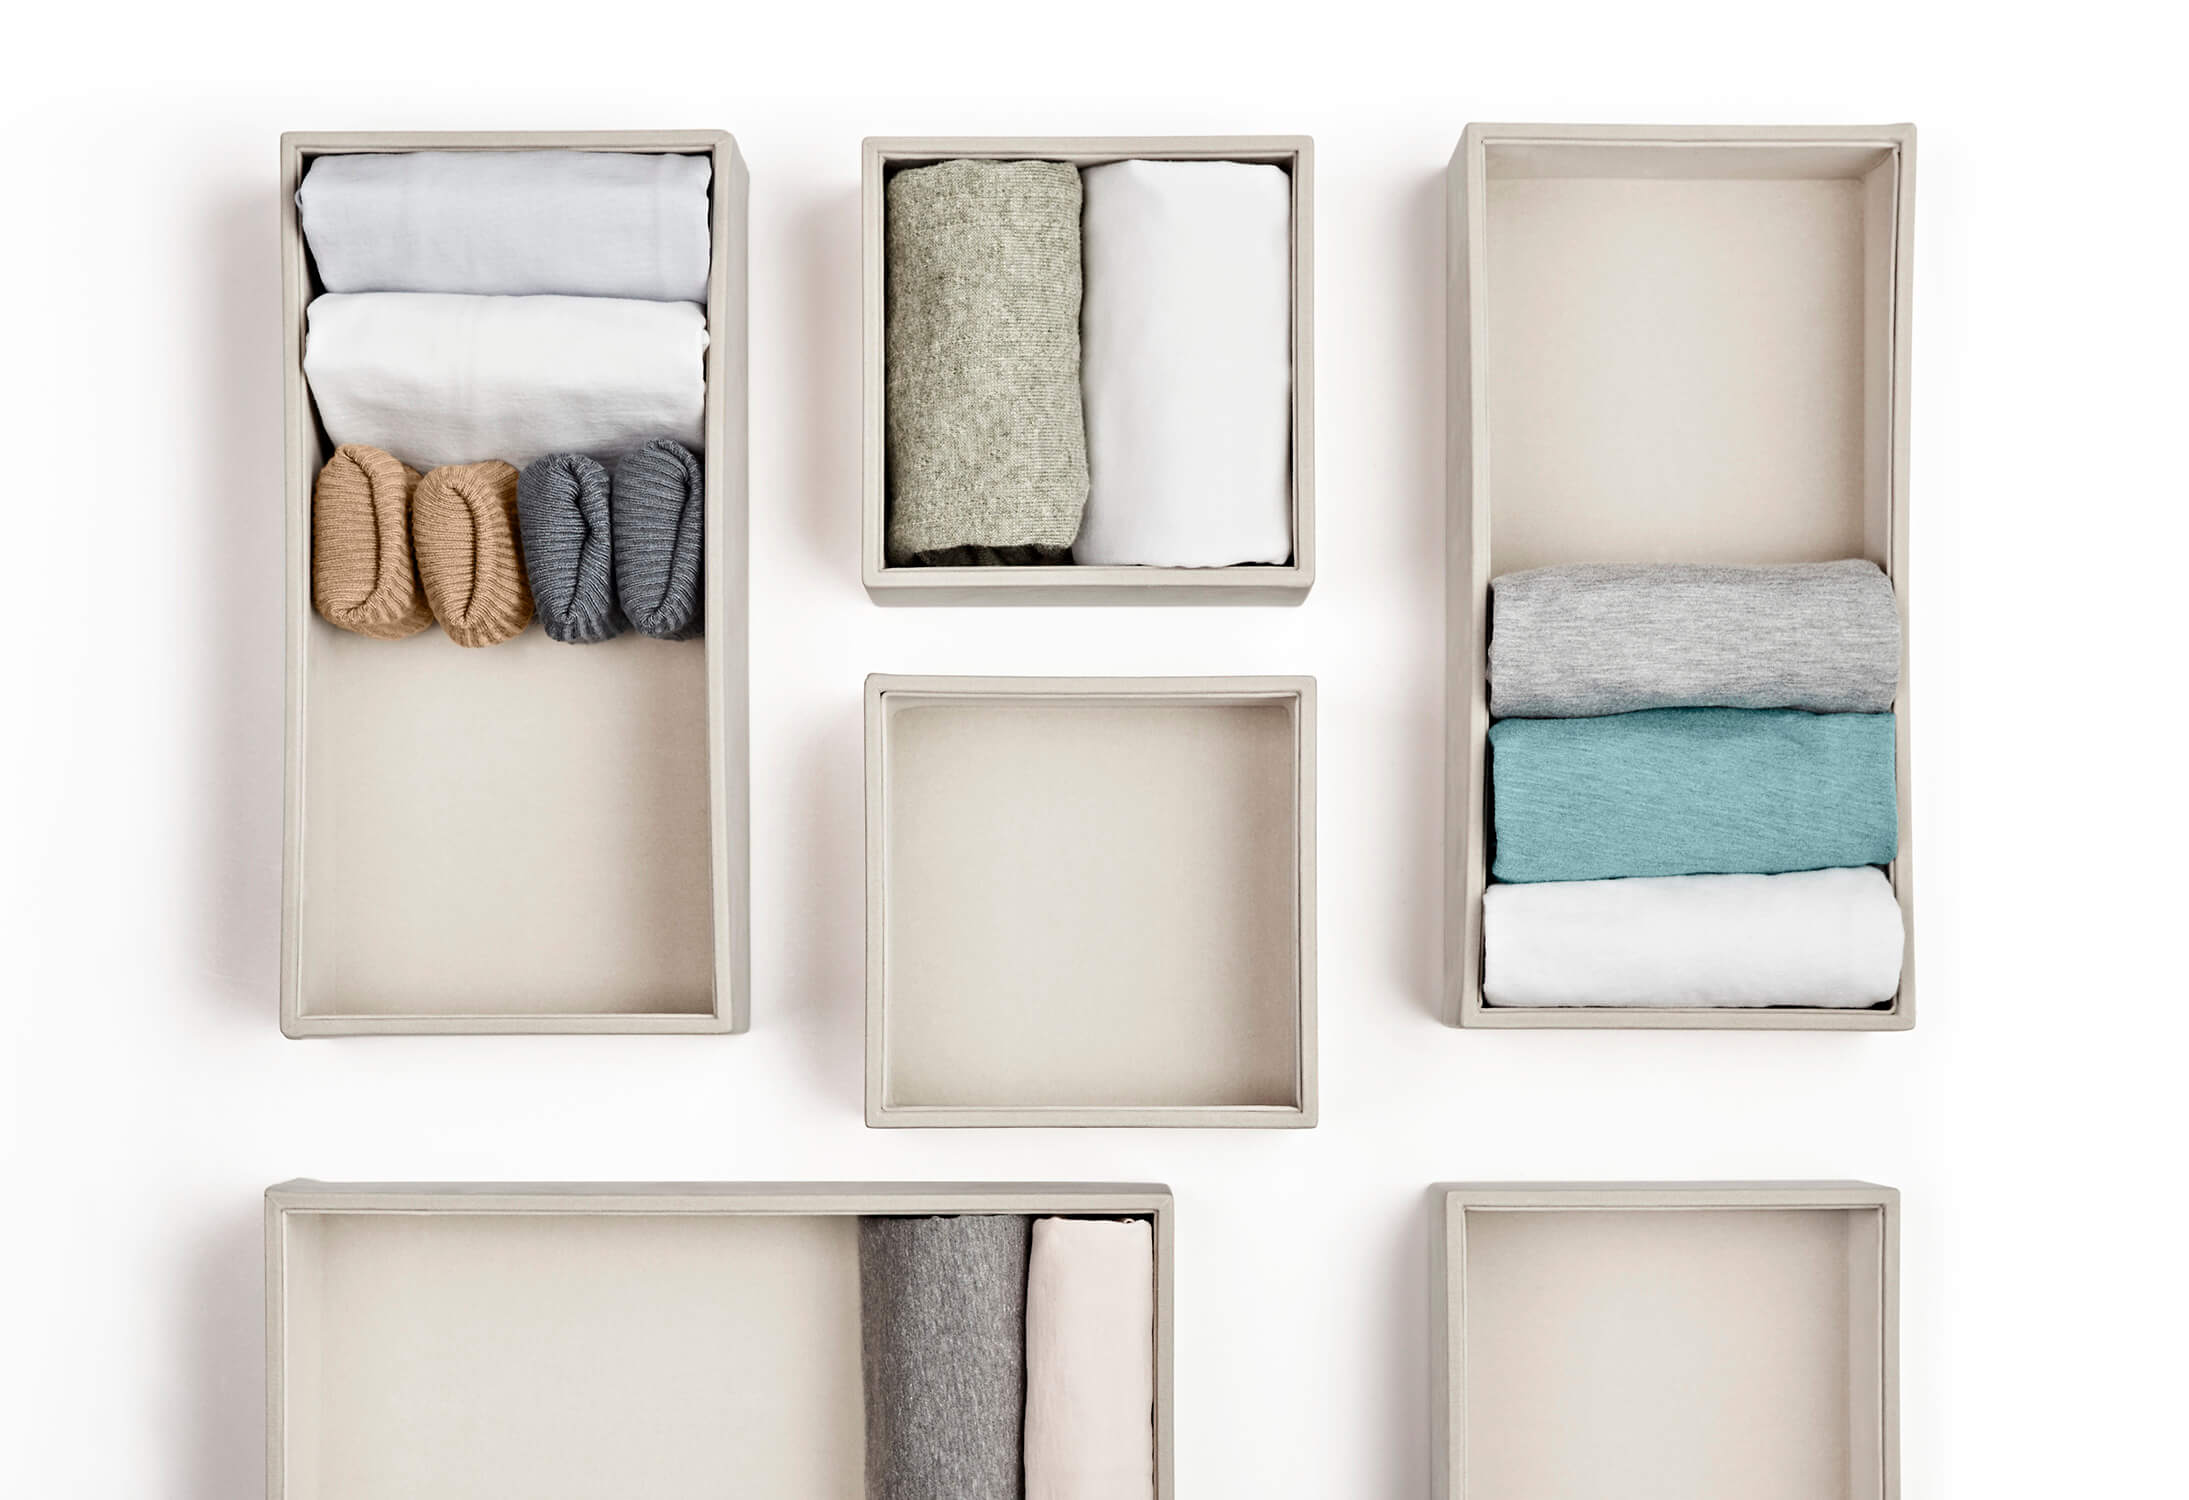 Neatly organized laundry in linen coloured organizers spaced out on a white background